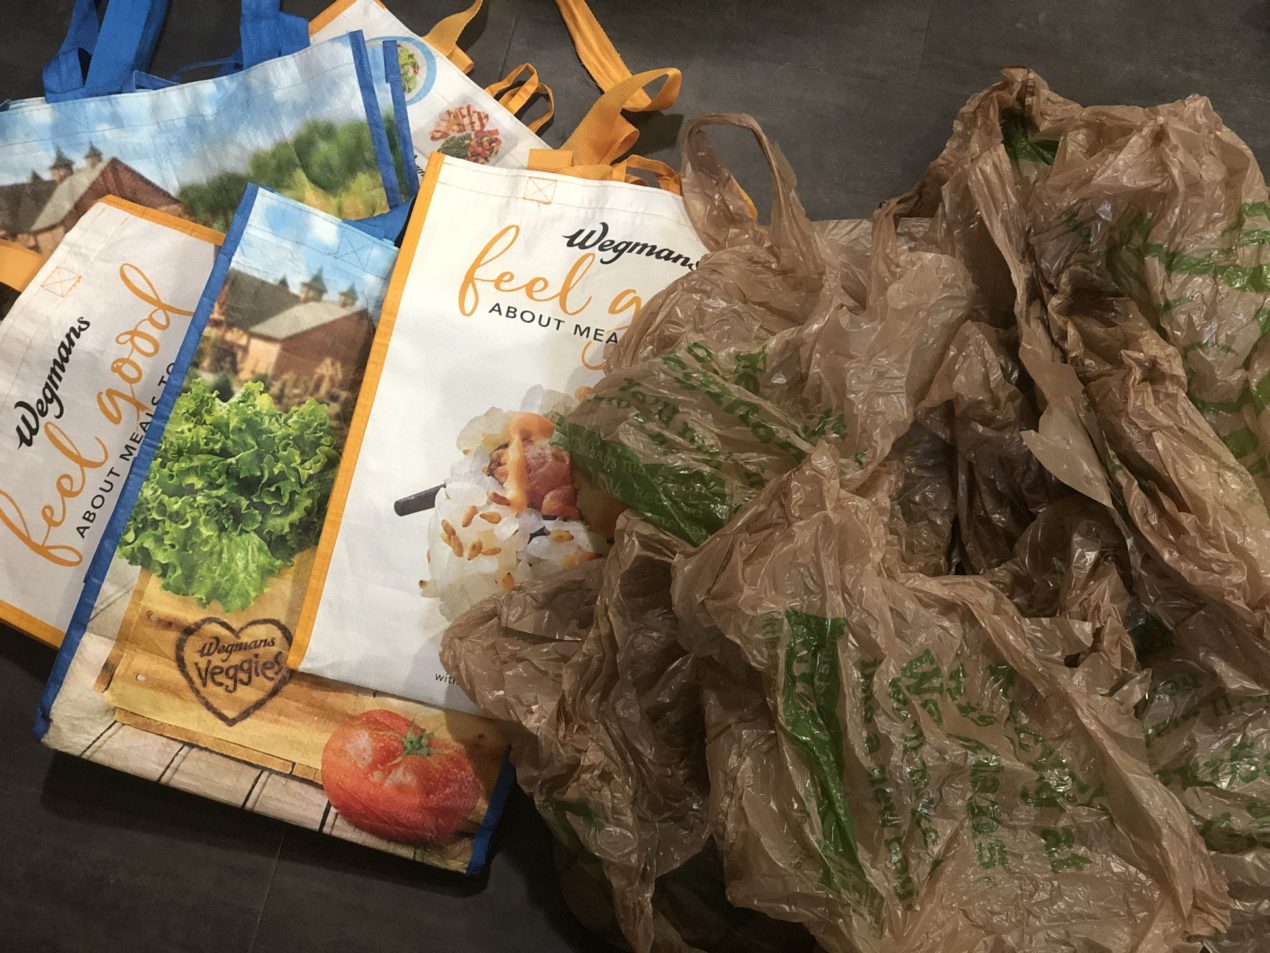 What You Need to Know About the NY Plastic Bag Ban Starting Early at Wegmans